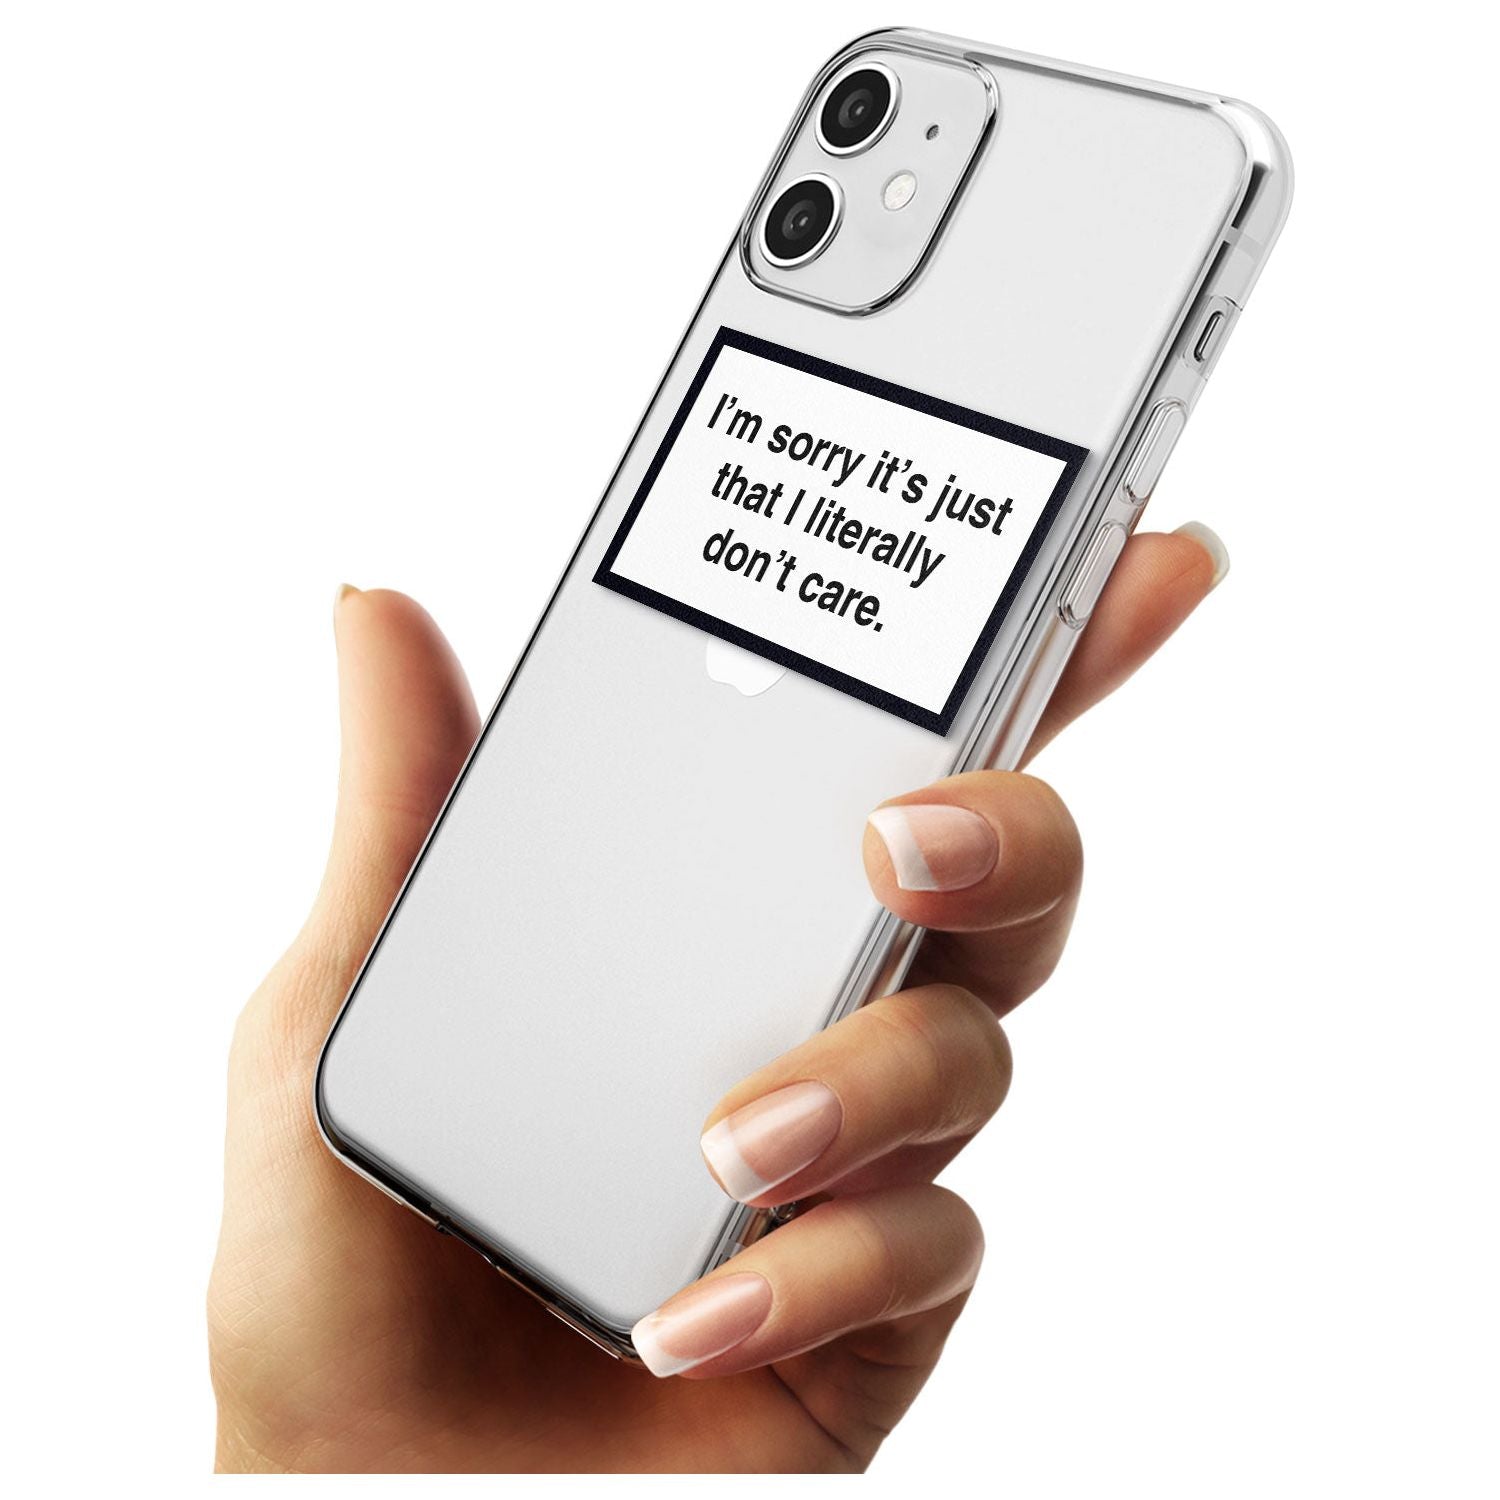 I'm sorry it's just that I literally don't care Black Impact Phone Case for iPhone 11